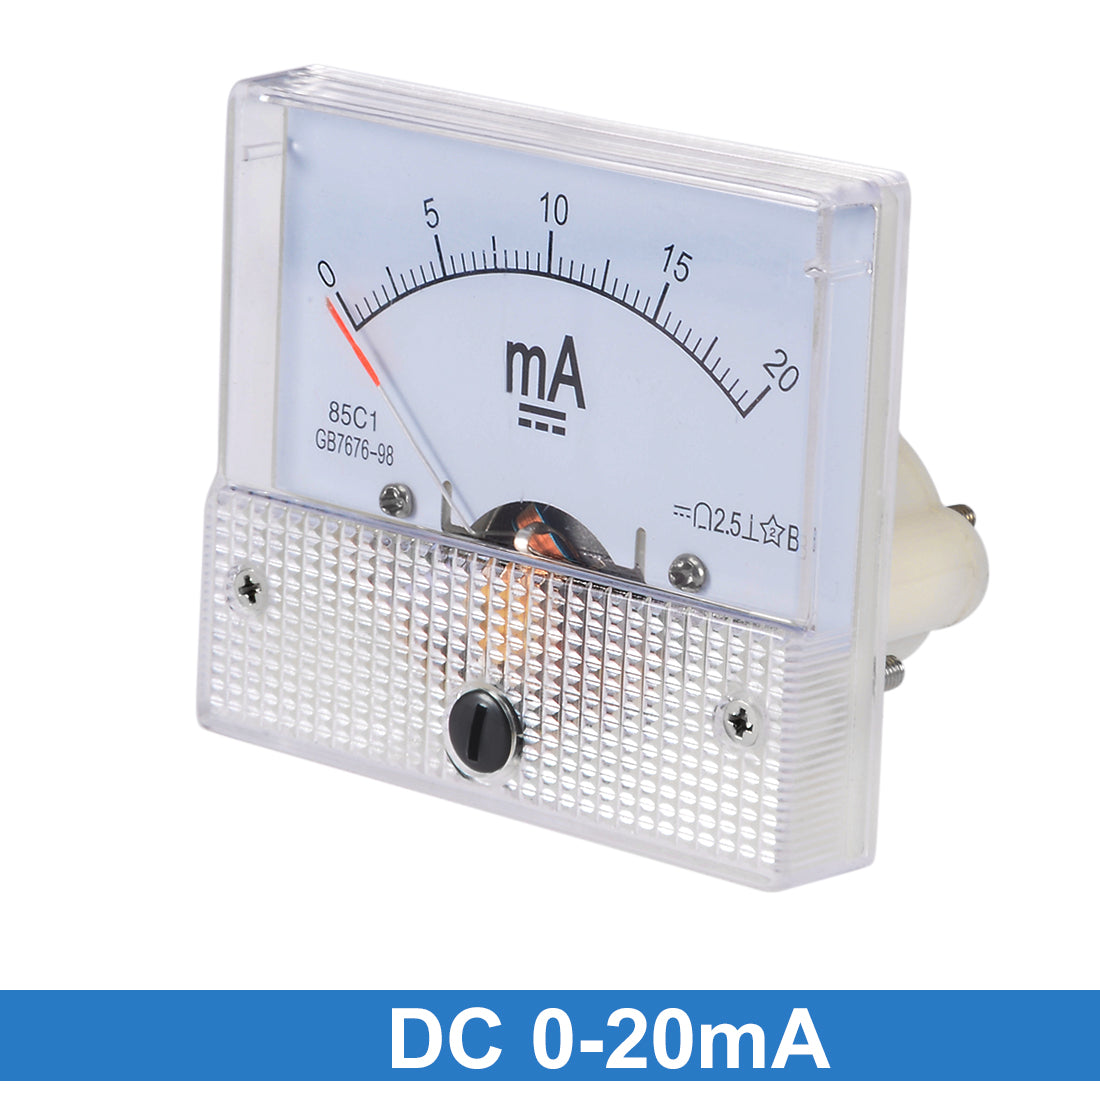 uxcell Uxcell 85C1 Analog Current Panel Meter DC 20mA Ammeter for Circuit Testing Ampere Tester Gauge 1 PCS